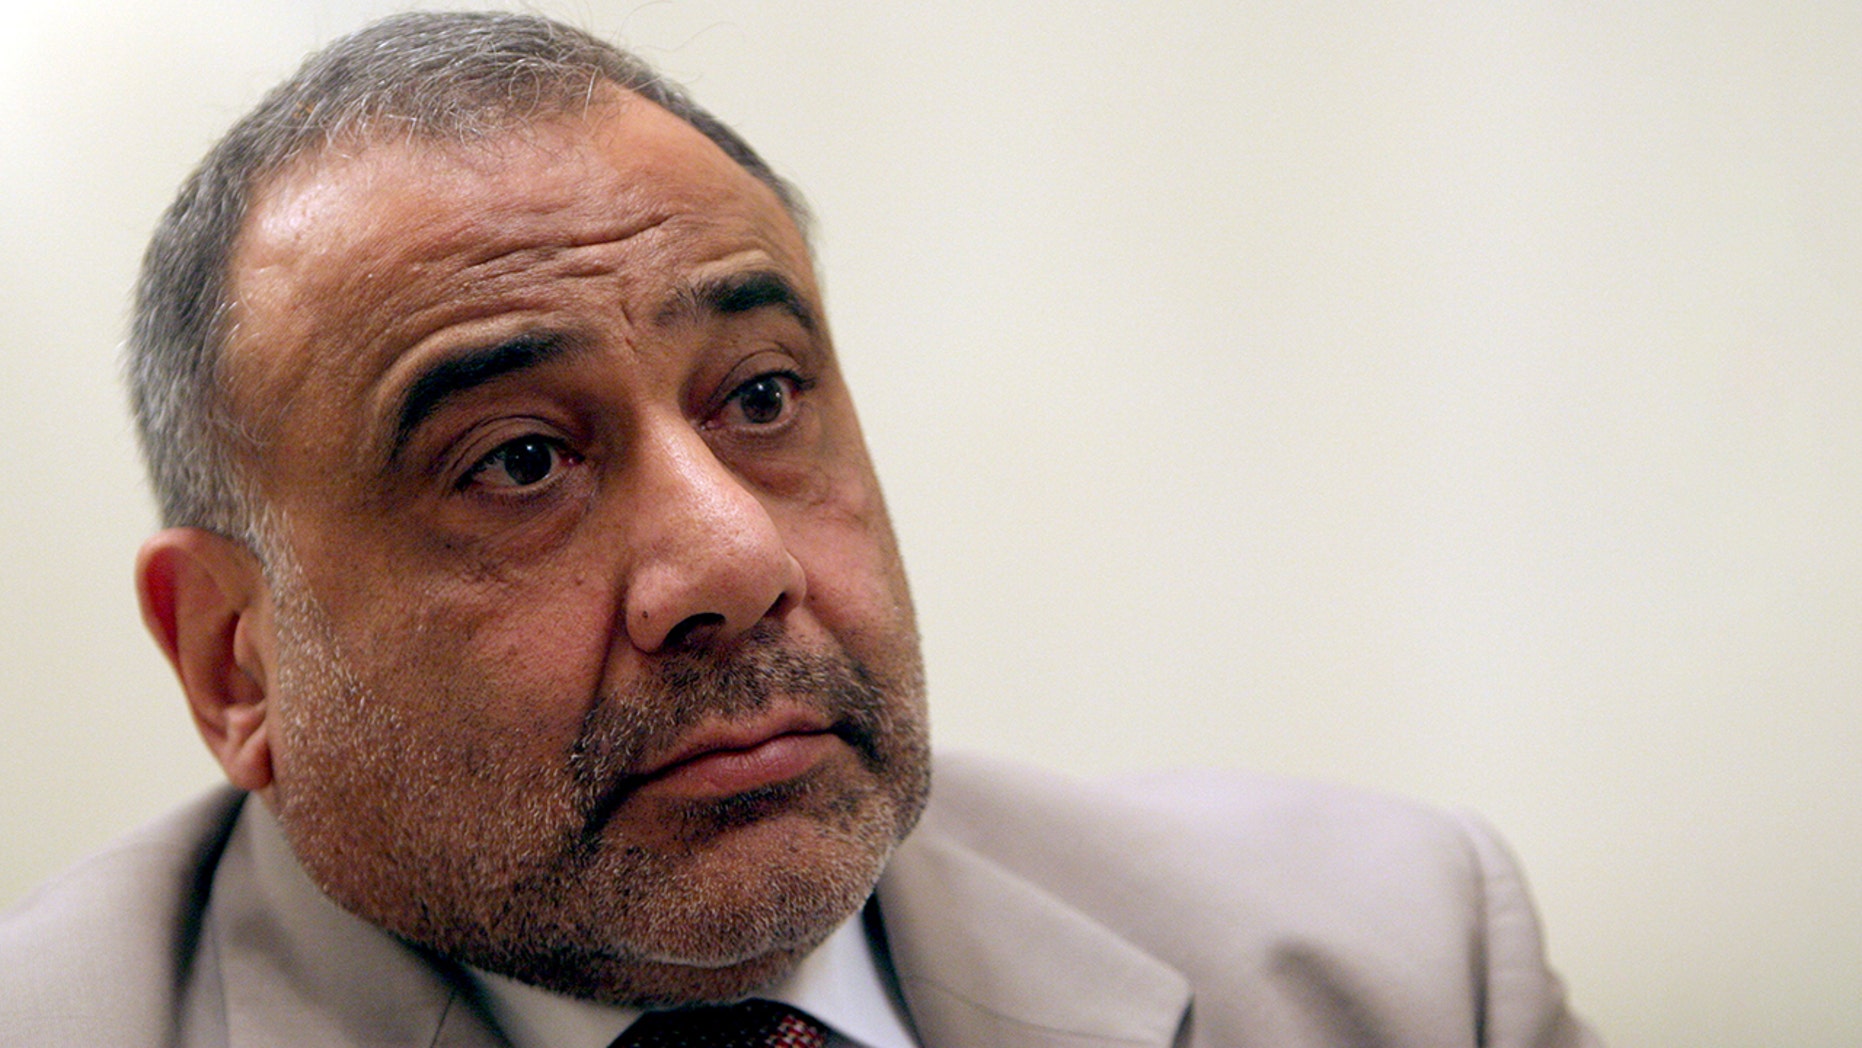 In this Jan. 3, 2006 file photo, Iraq's vice president Adel Abdul-Mahdi is seen during an interview with The Associated Press in Baghdad, Iraq. (AP Photo/Khalid Mohammed, File)